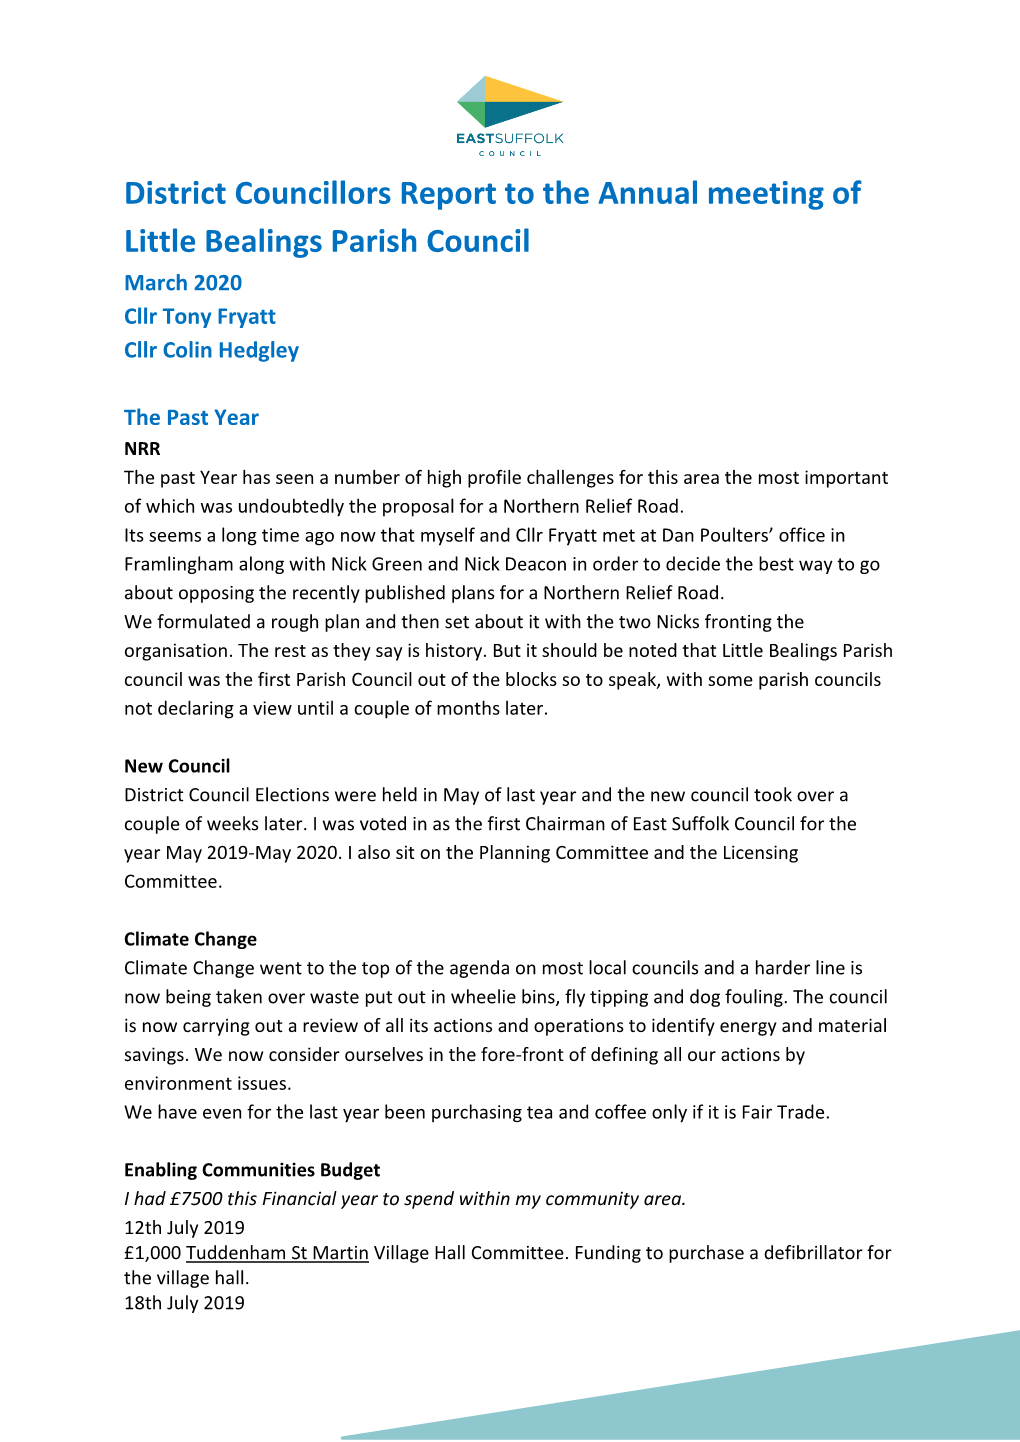 District Cllrs Report to Little Bealings PC March 2020 Annual